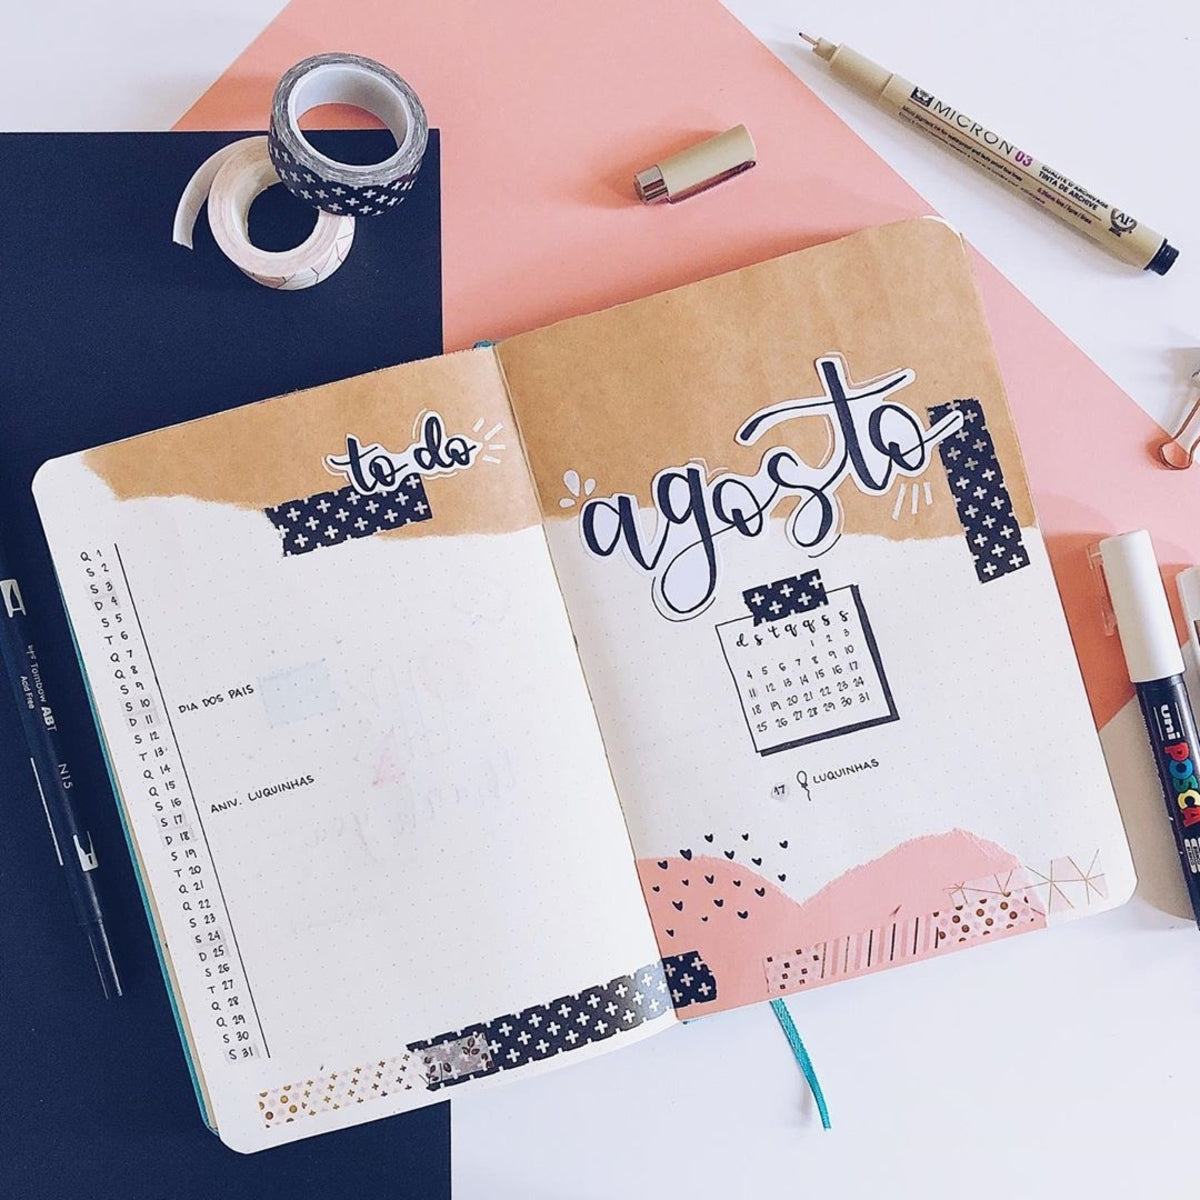 7 Creative Ways To Use Kraft Paper In Your Bullet Journal